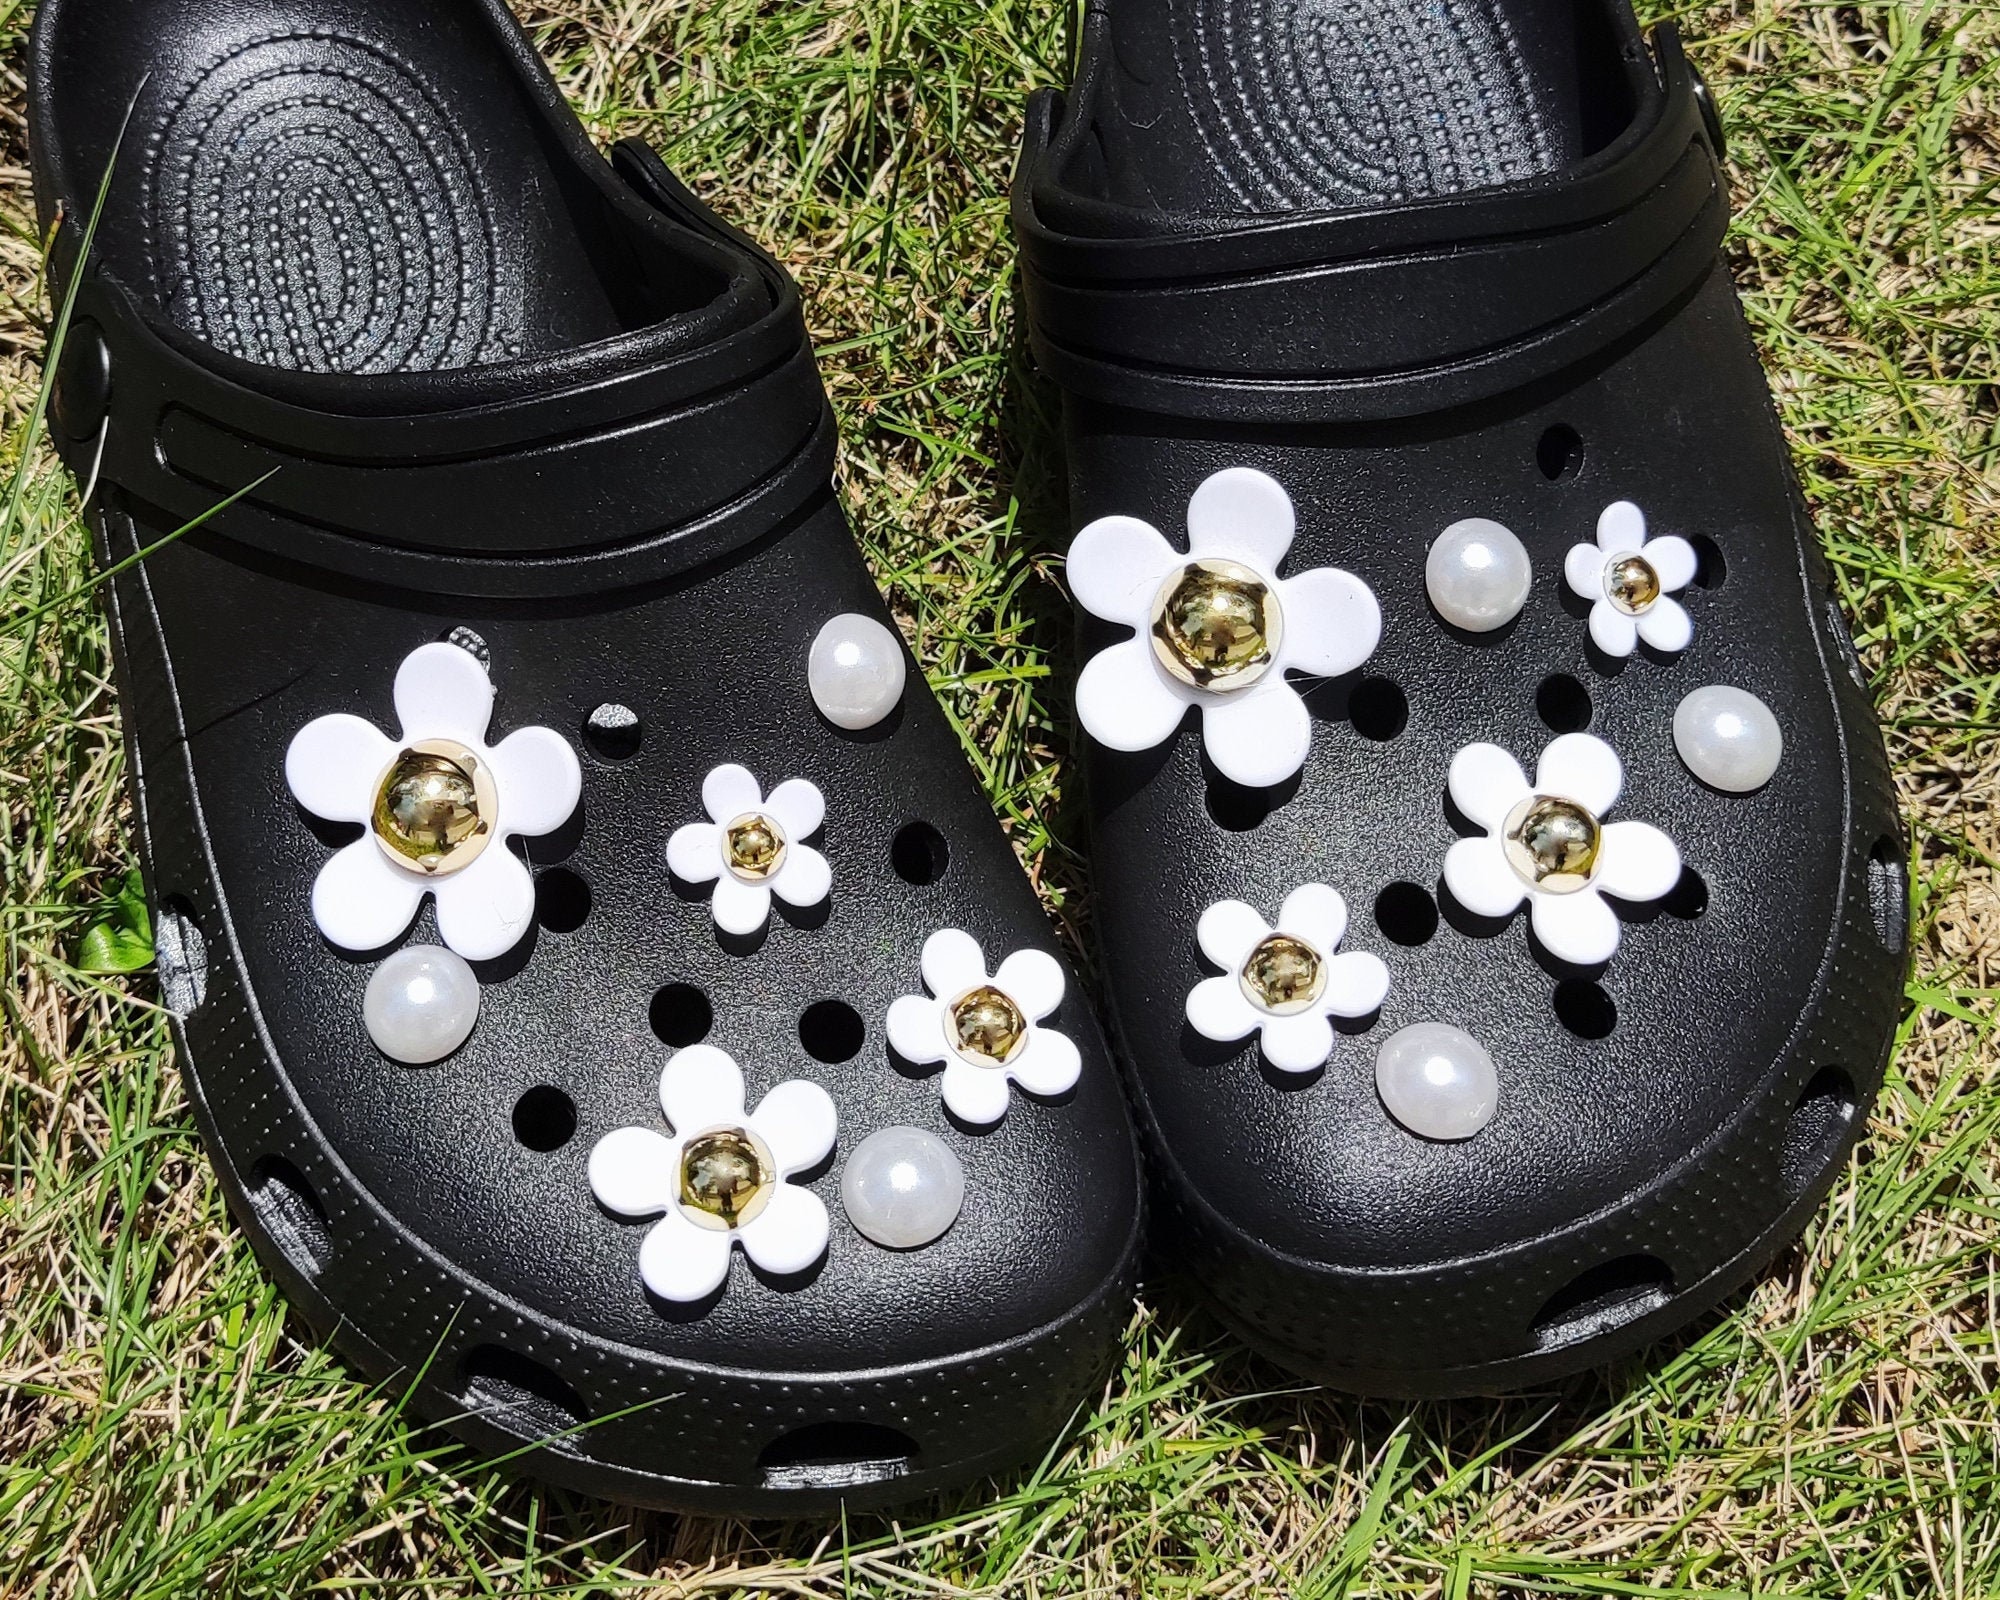 14pcs/set Acrylic Material Perforated Flower & Daisy Bow Shoe